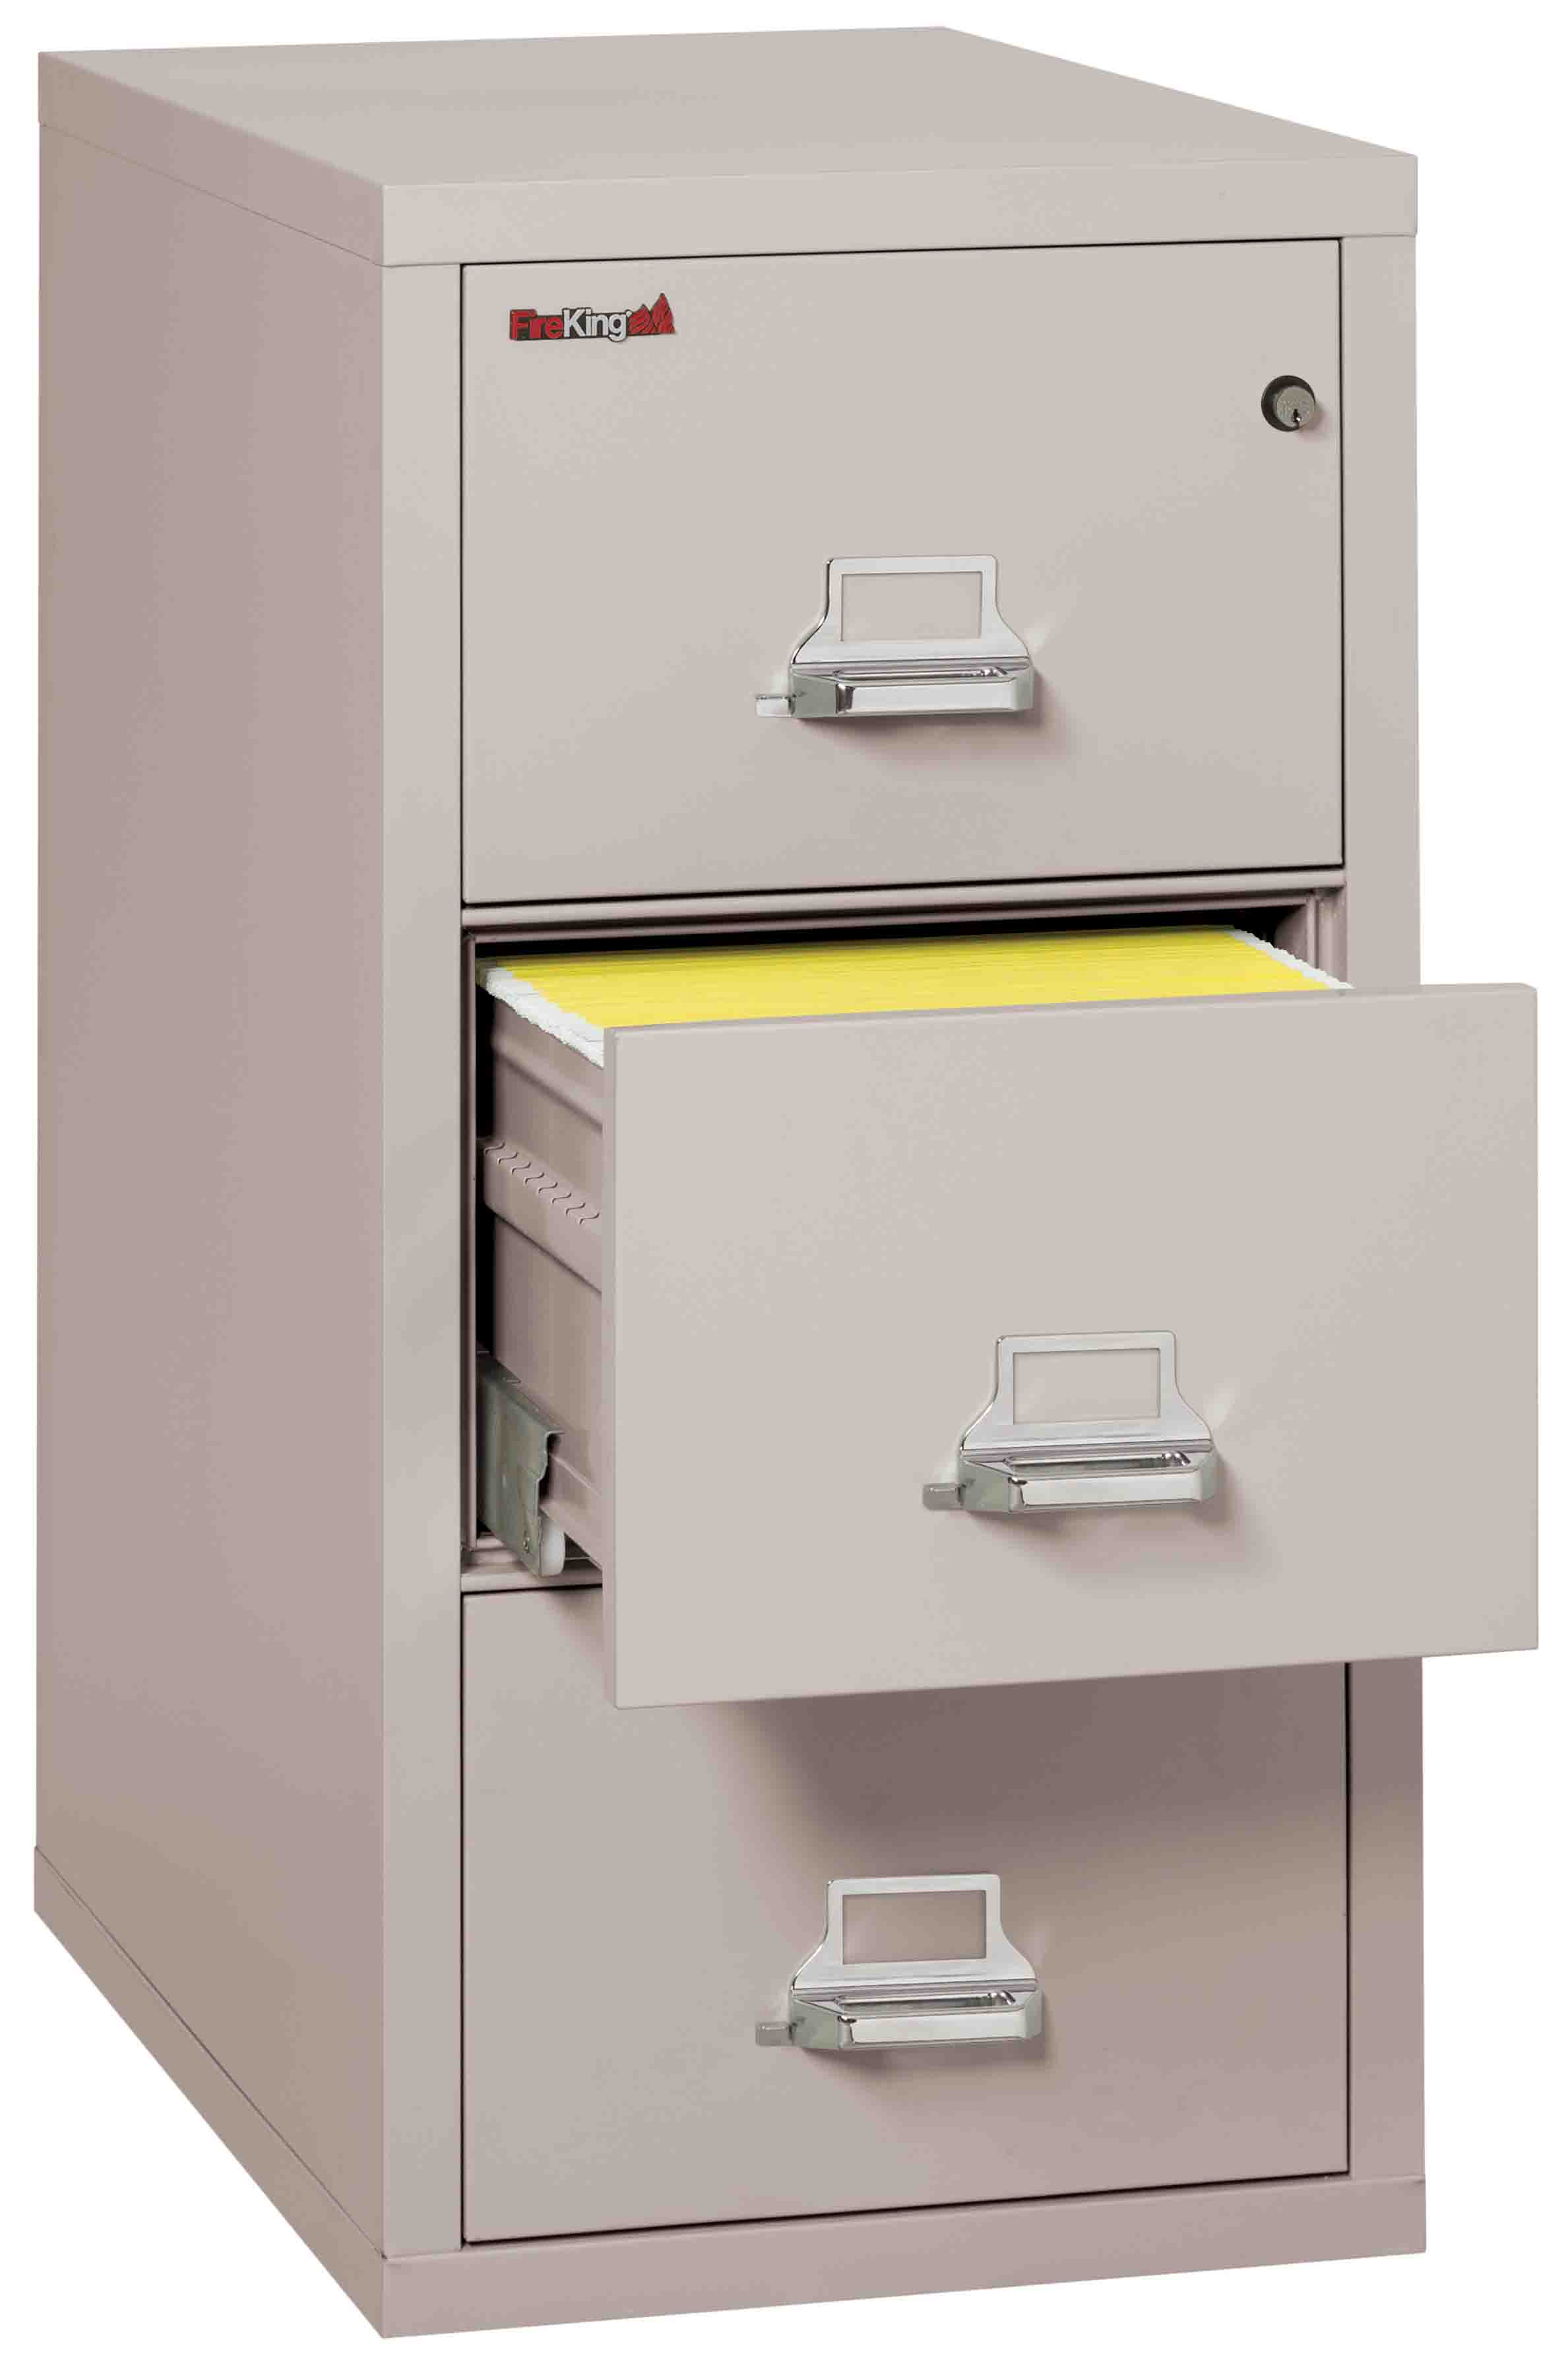 Fire King 3 1831 C Vertical Fireproof File Cabinets 3 Drawer 1